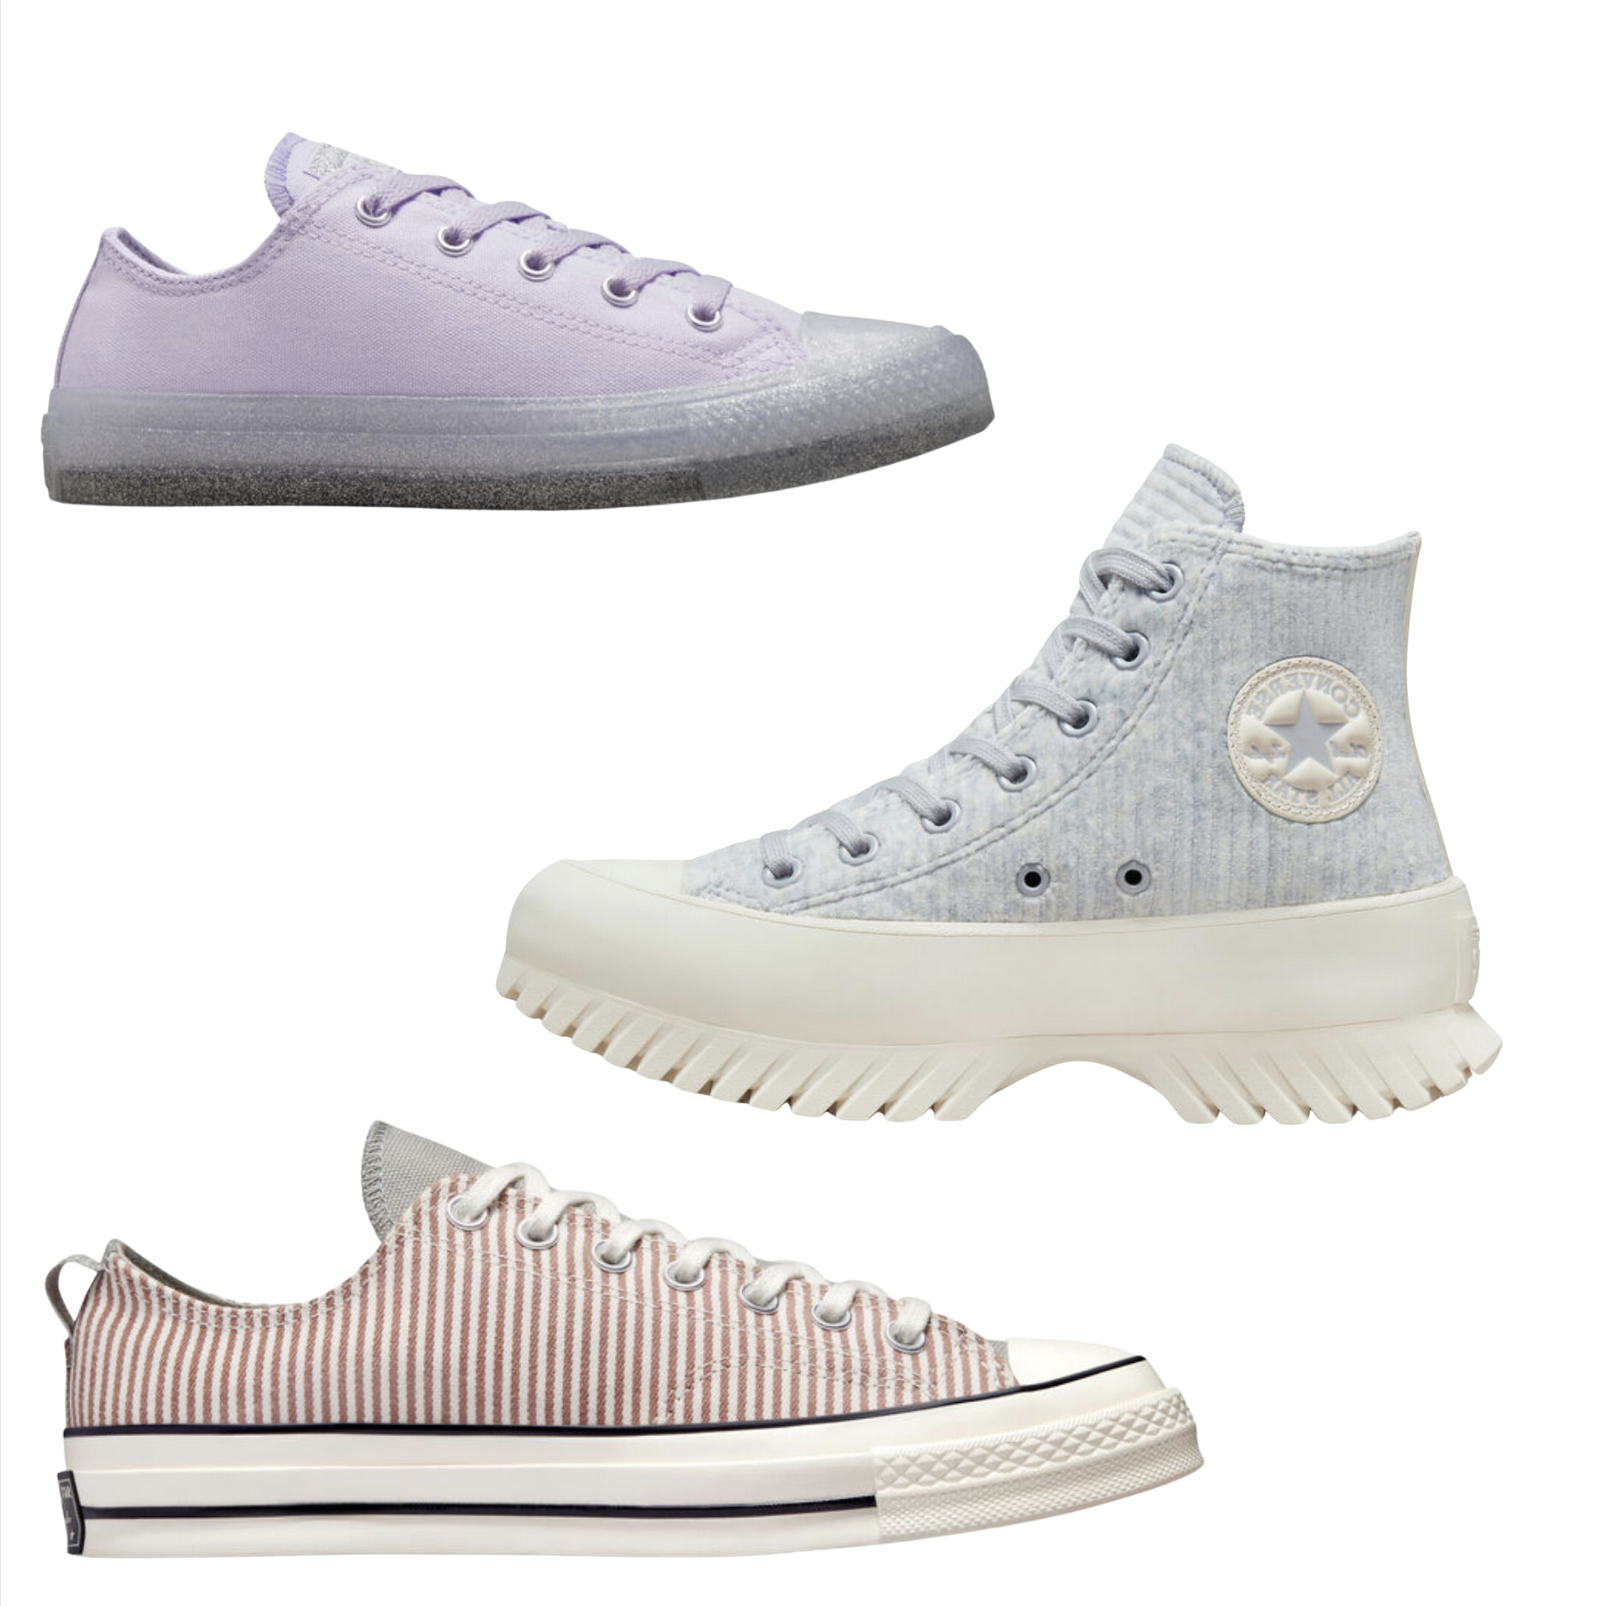 Men's and Converse from $20, kids' from $17 - Clark Deals